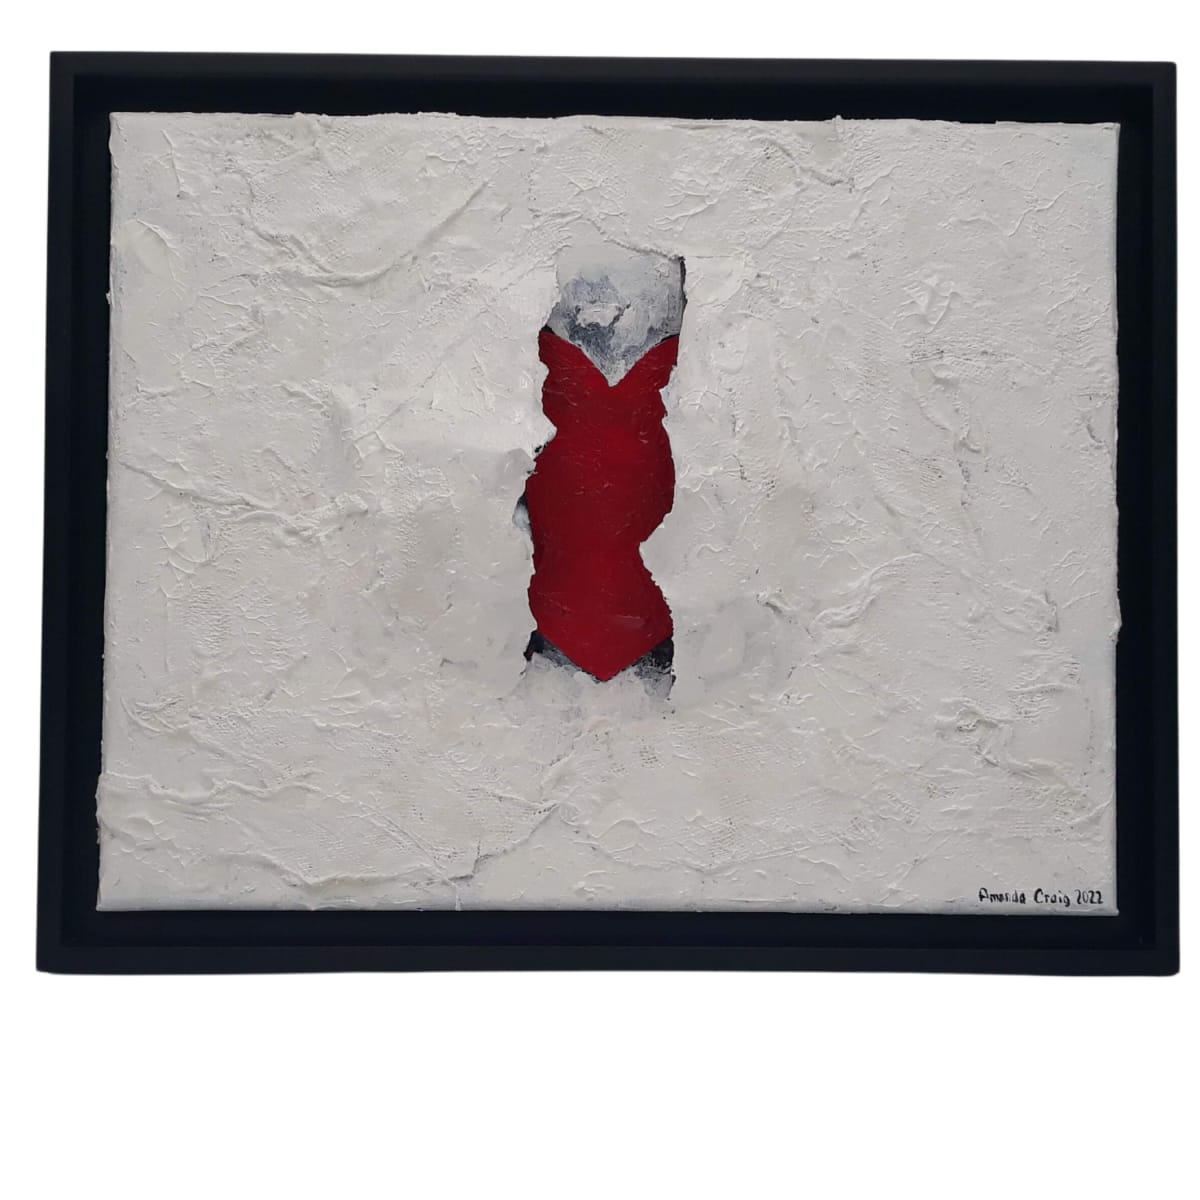 Wearing Your Heart on Your Sleeve by Amanda Craig  Image: Original mixed media on wrapped canvas in floating frame. Heart partially covered in 3D texture; acrylic, paper, and plaster. Heavy texture; therefore, no varnish.